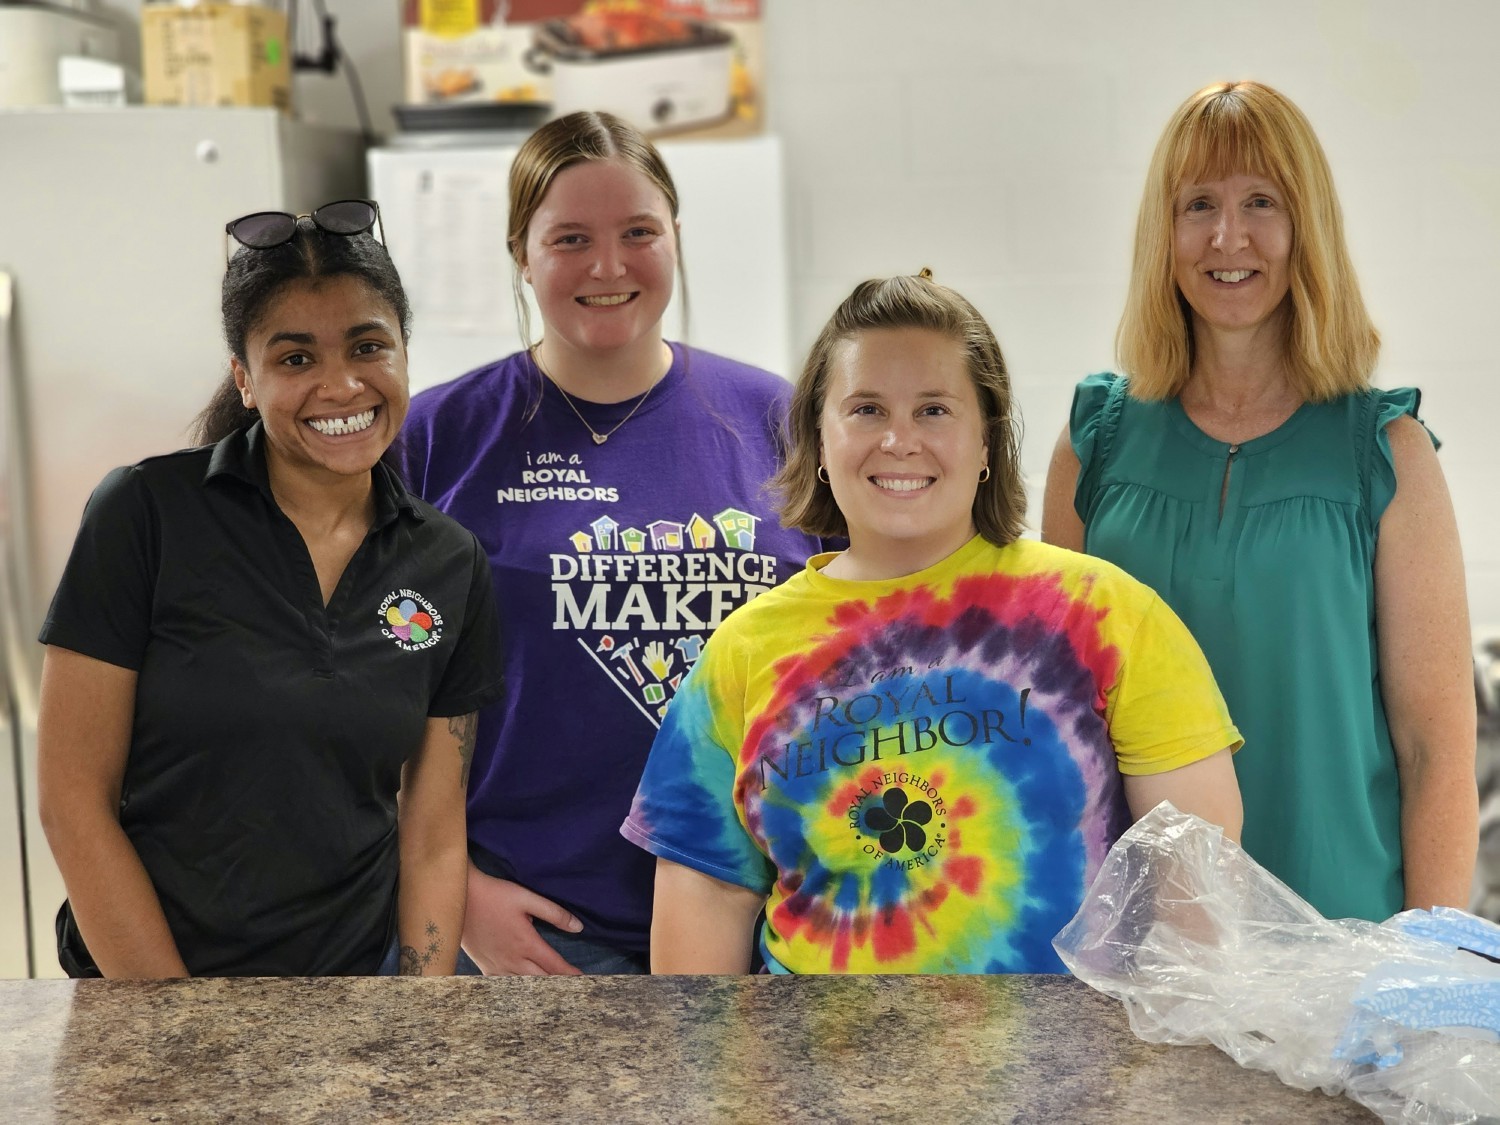 Team members had smiles for miles as they provided nourishment to community members in need.